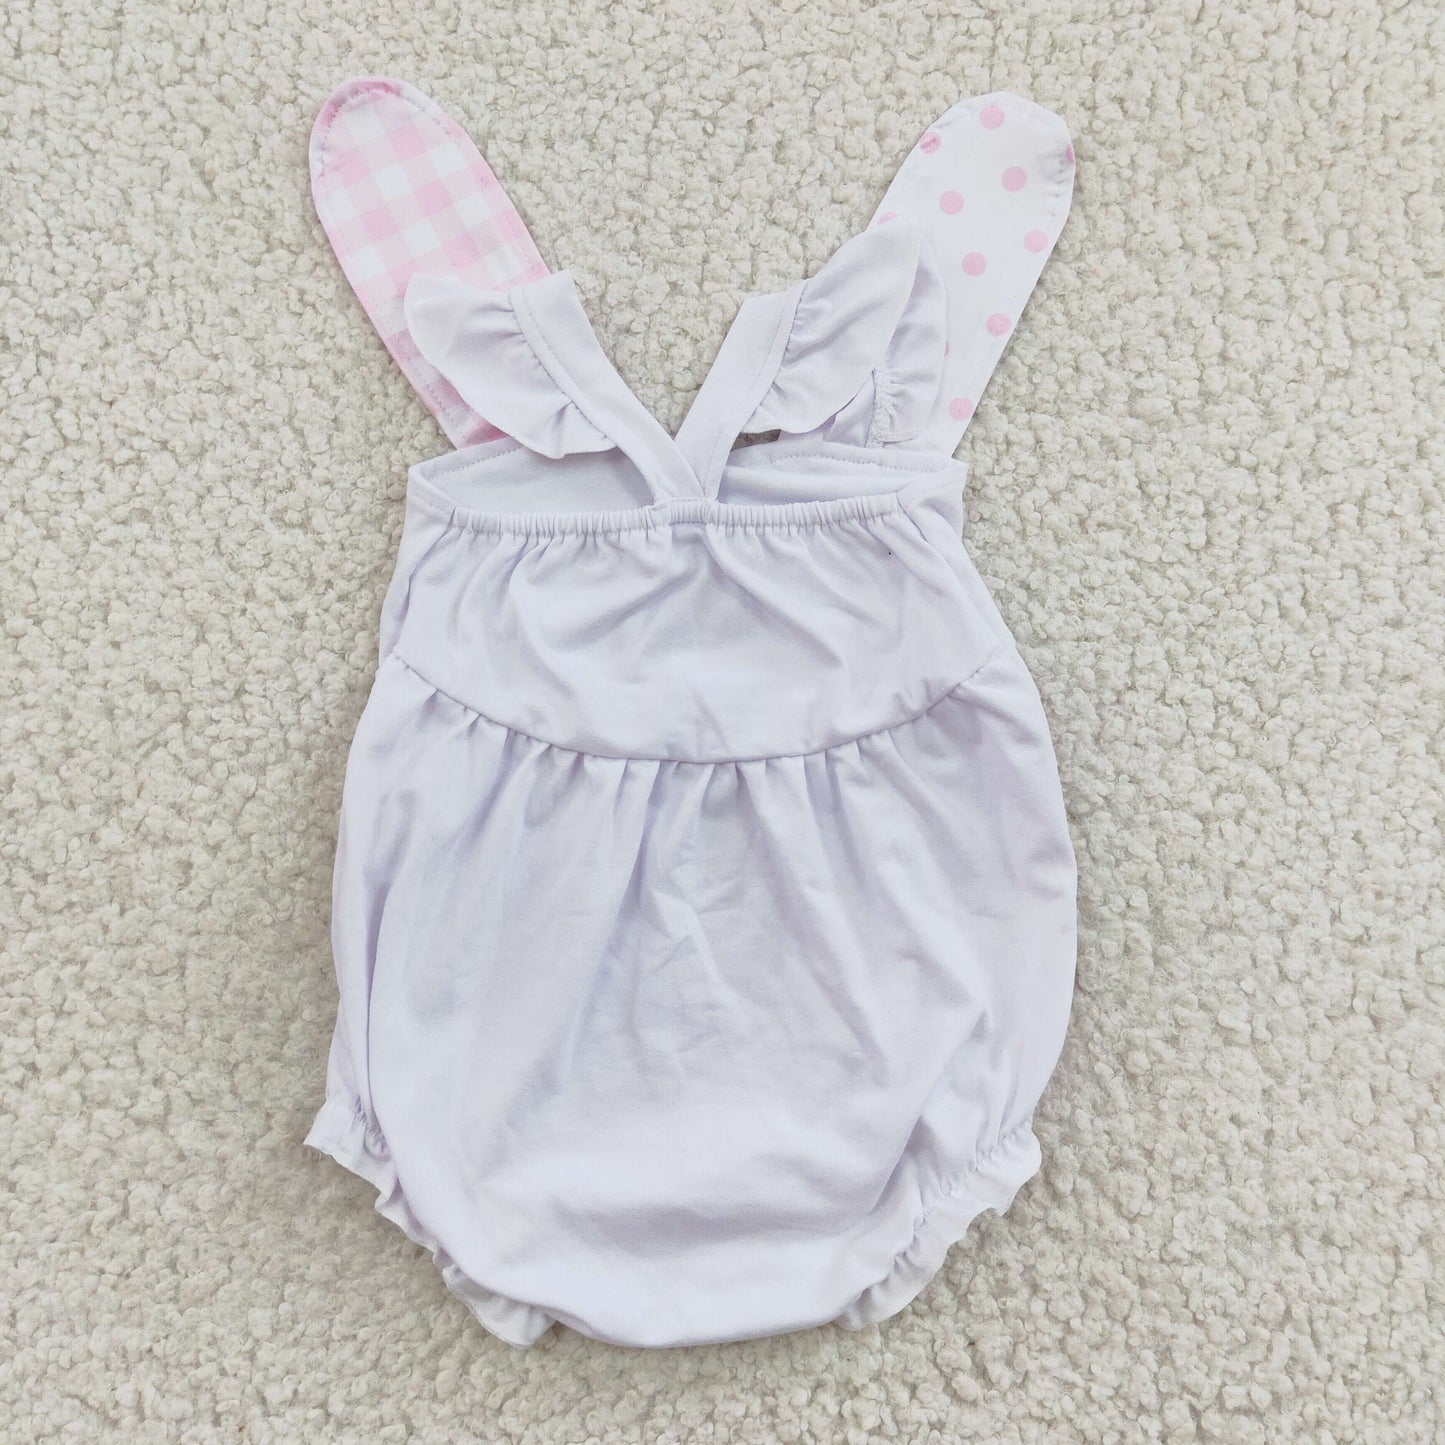 SR0111 Easter Bunny Embroidery Girls Romper